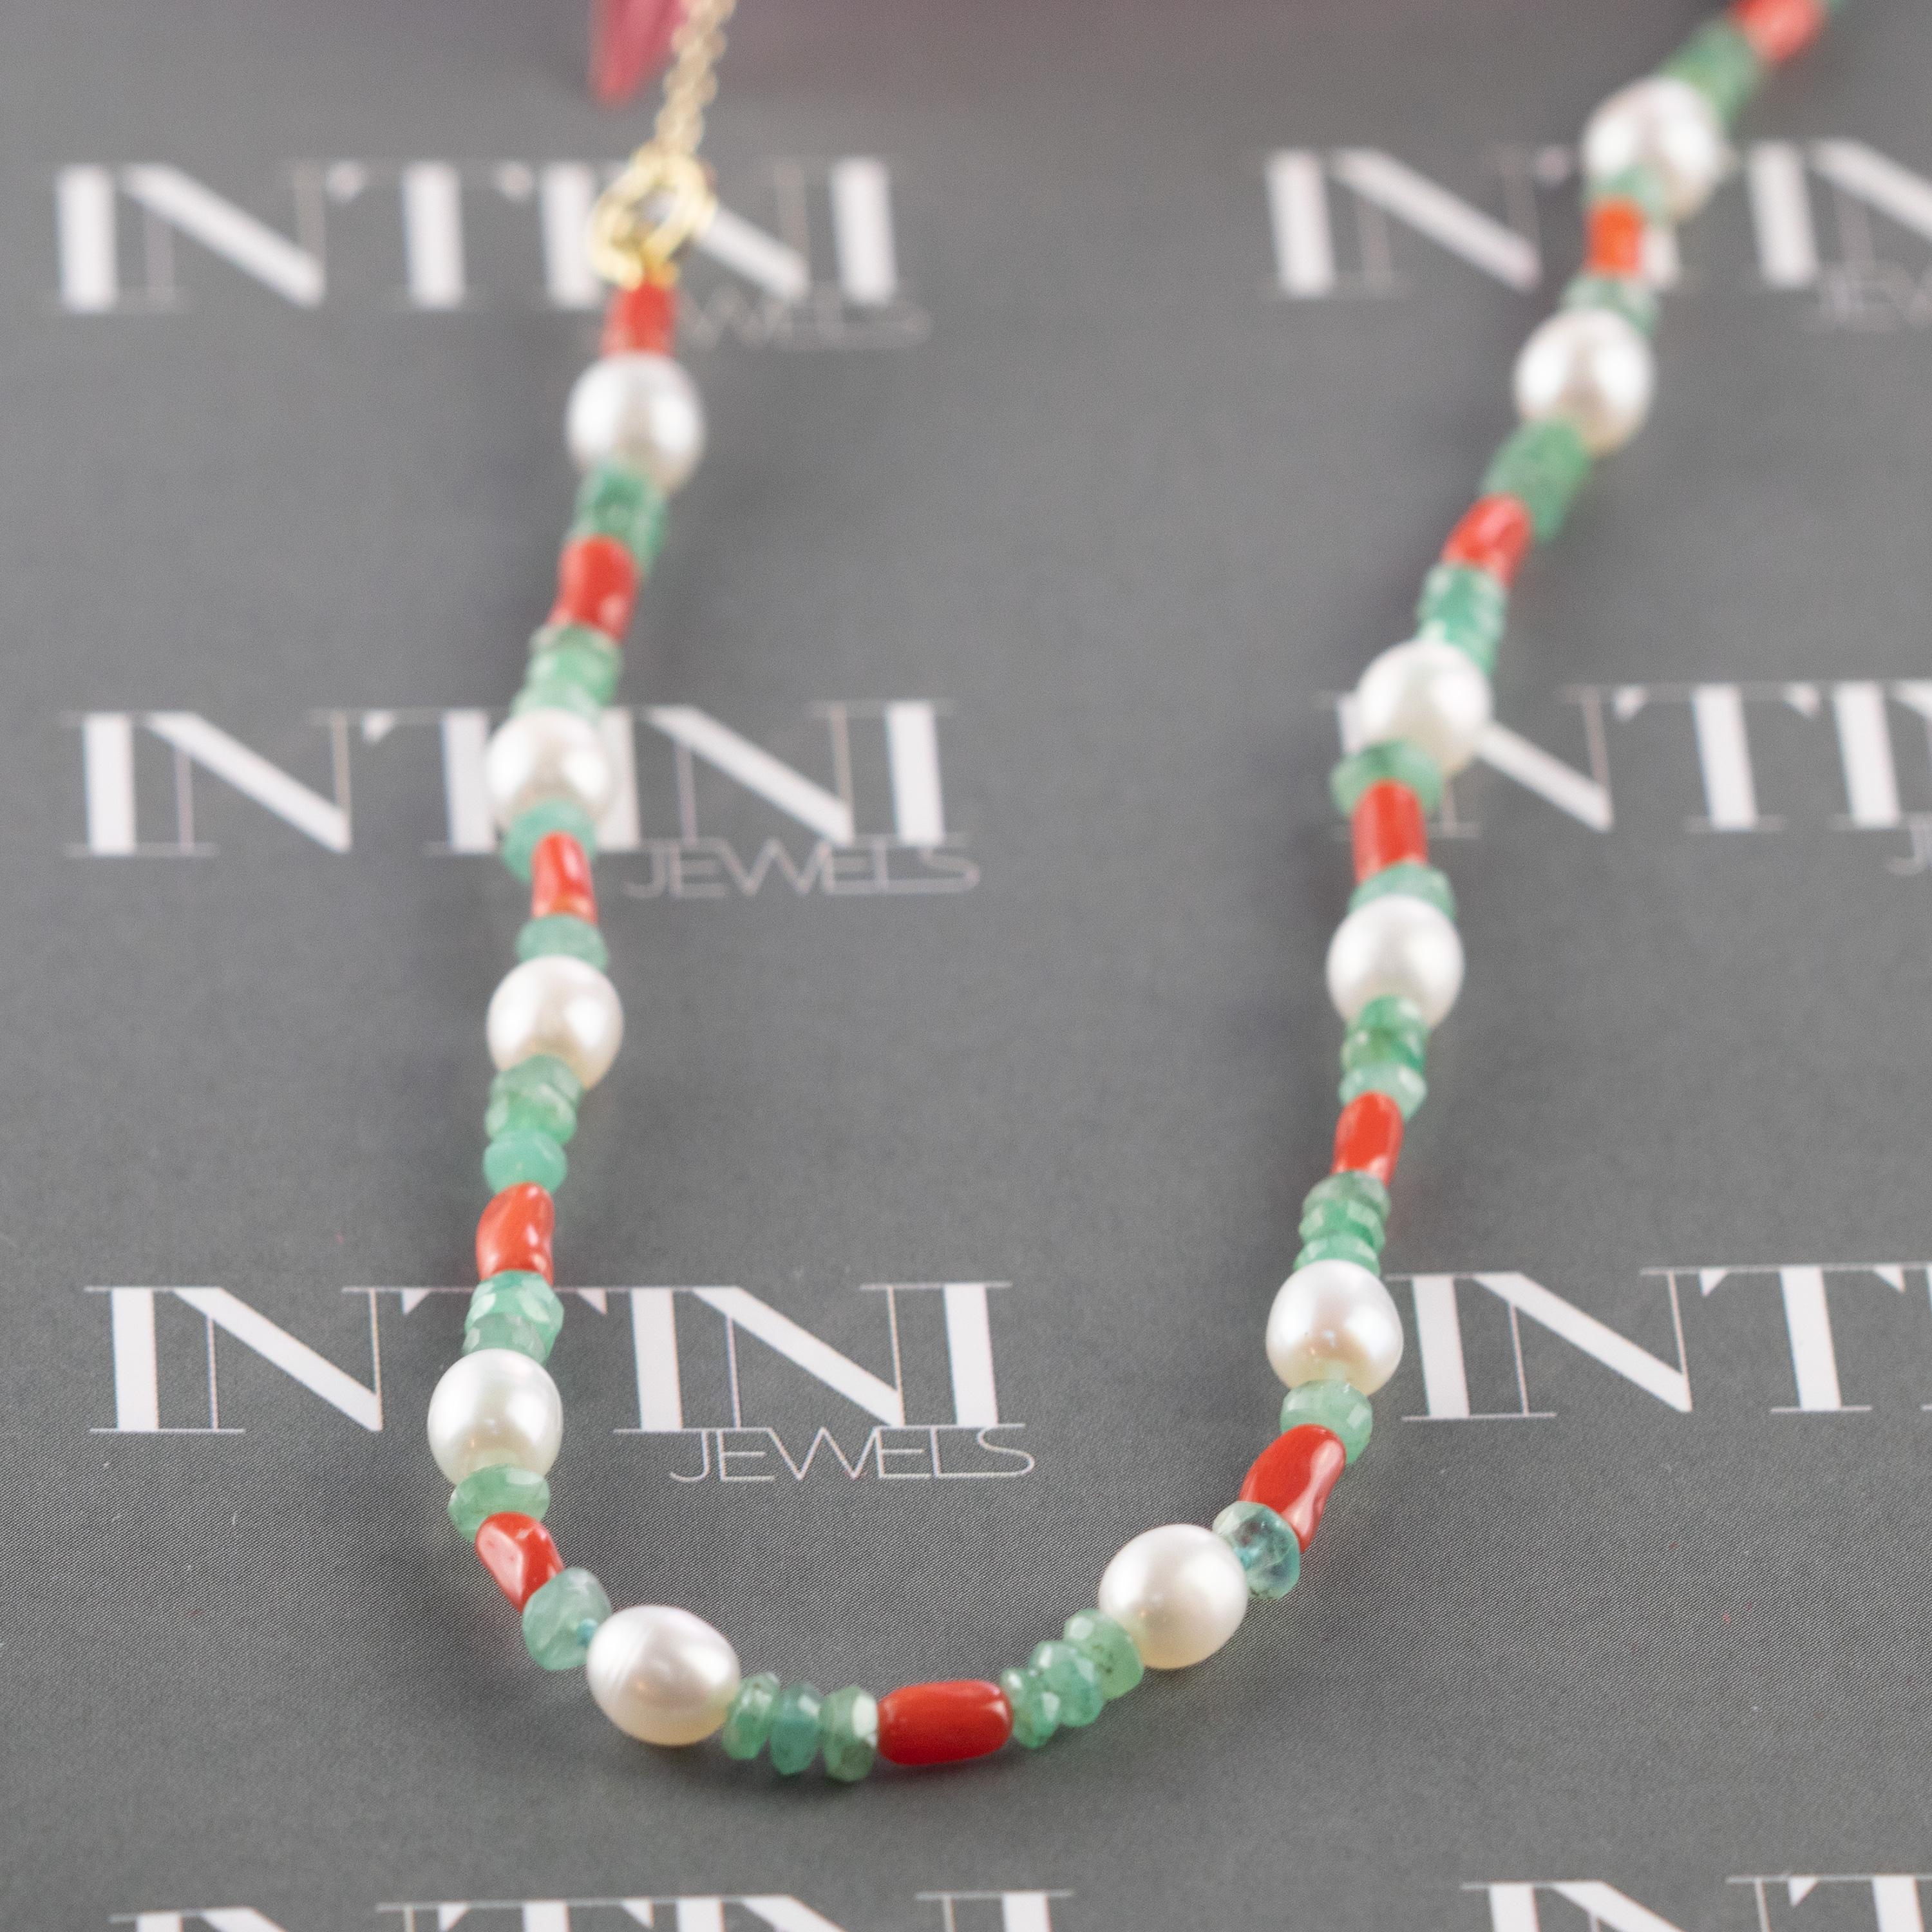 Intini Jewels Coral Emeralds Mother of Pearl 14 Karat Gold Chain Chic Necklace For Sale 5